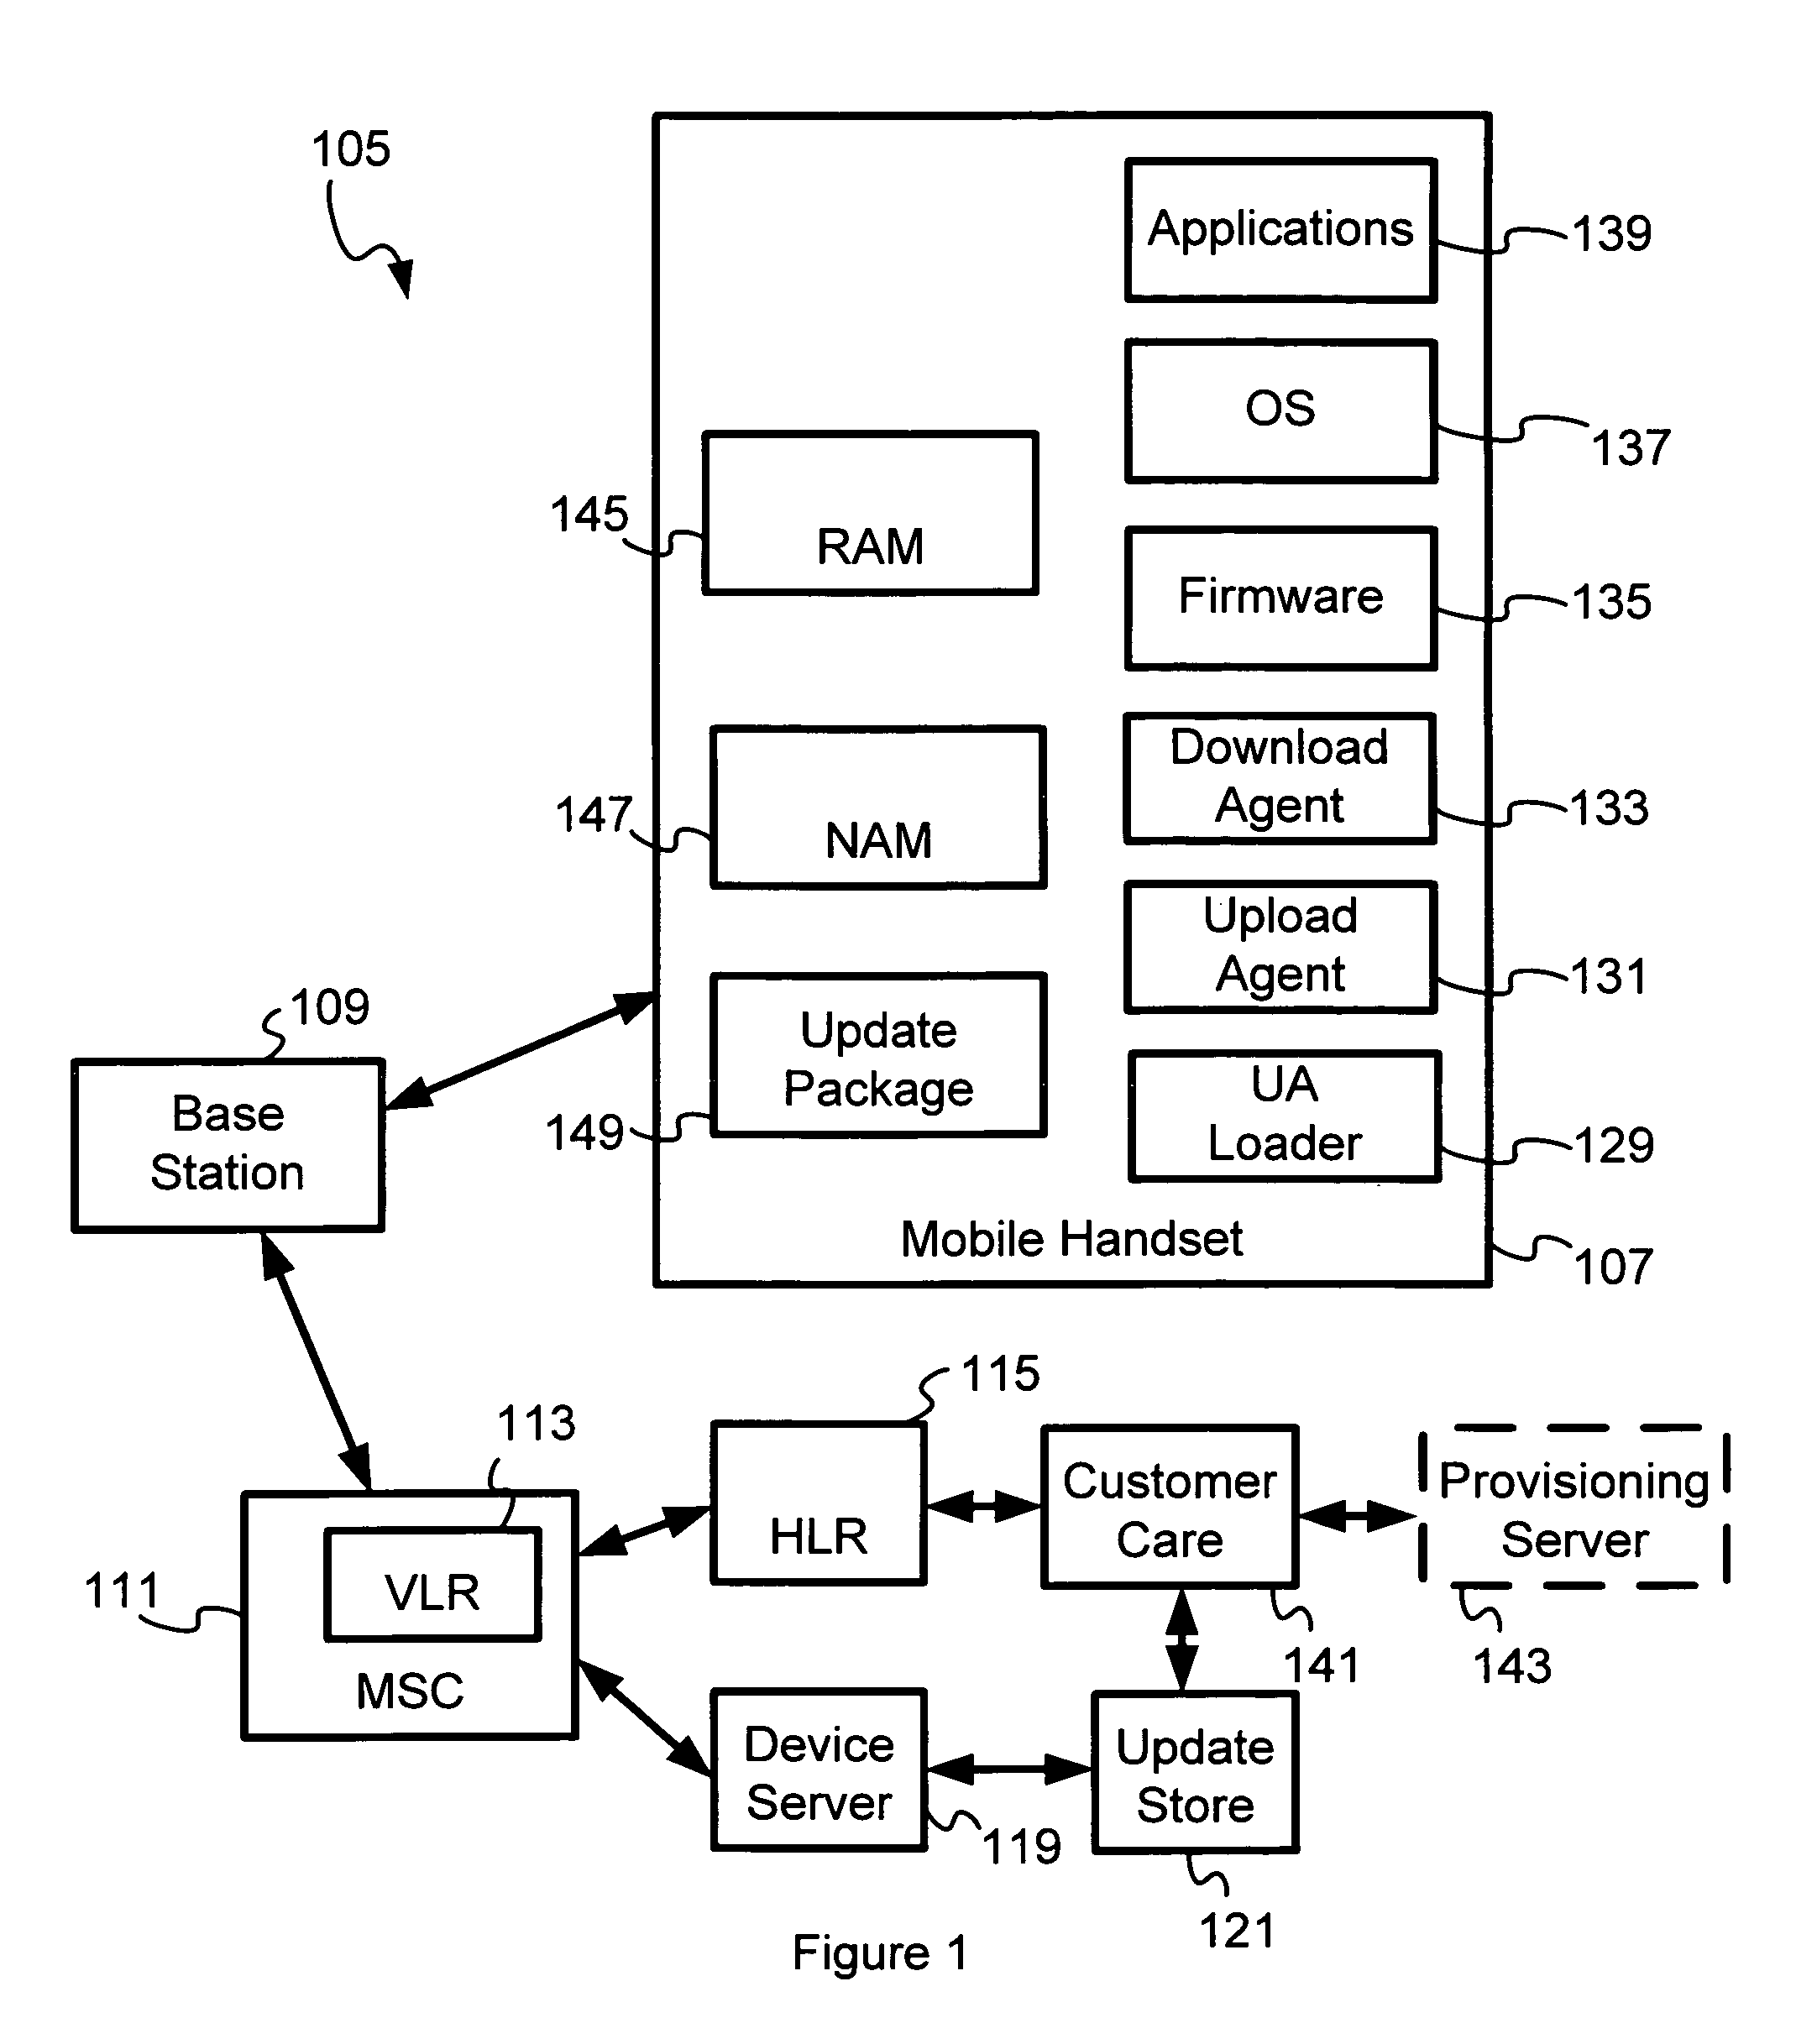 Electronic device network employing provisioning techniques to update firmware and/or software in electronic devices